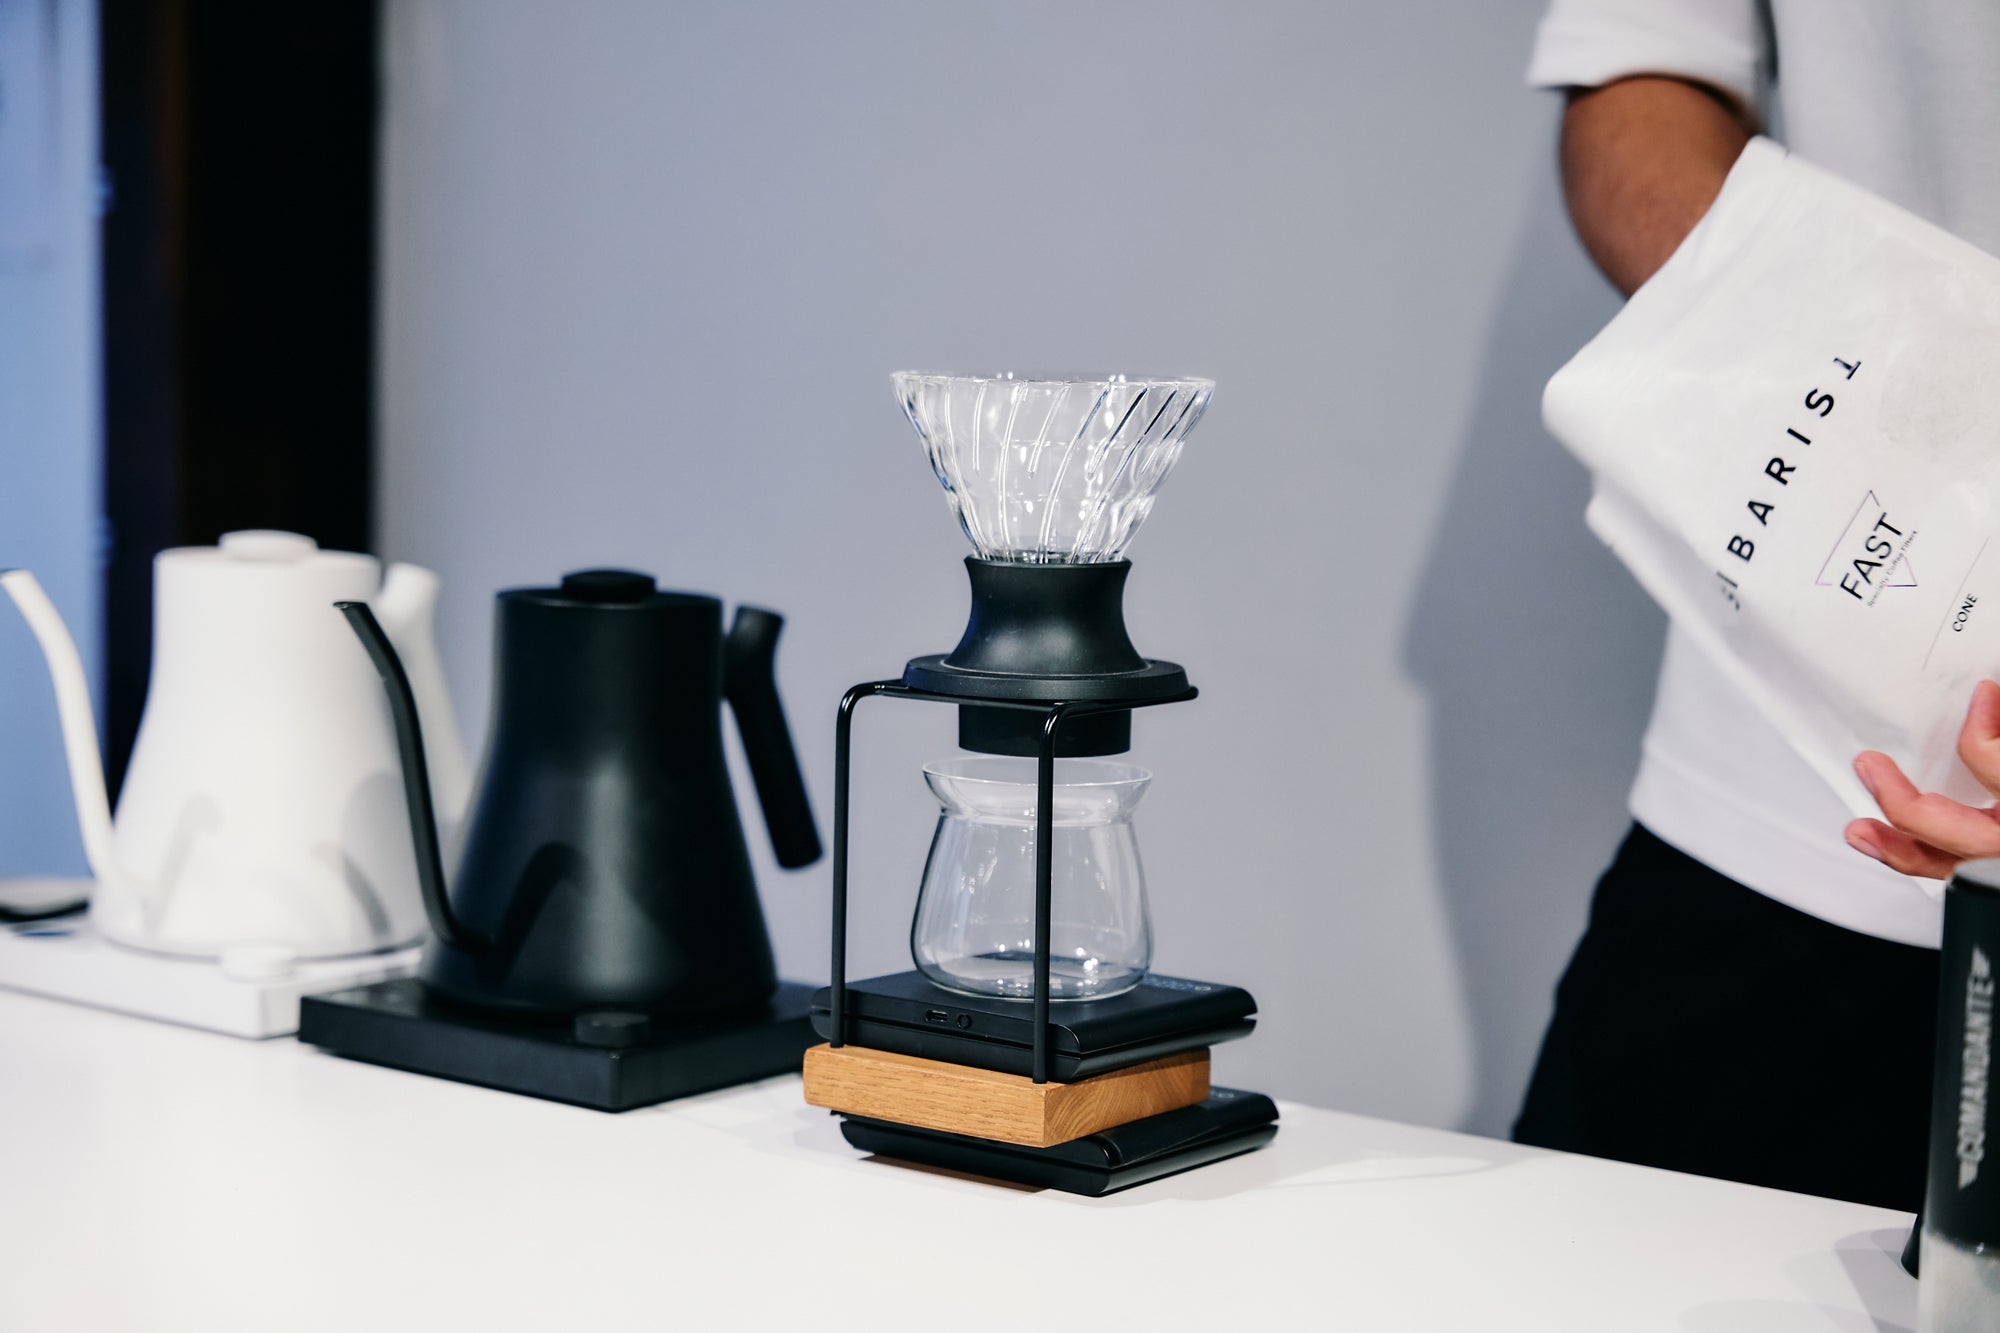 Nonstop Coffee Brewers Cup2023チャンピオンレシピのご紹介！